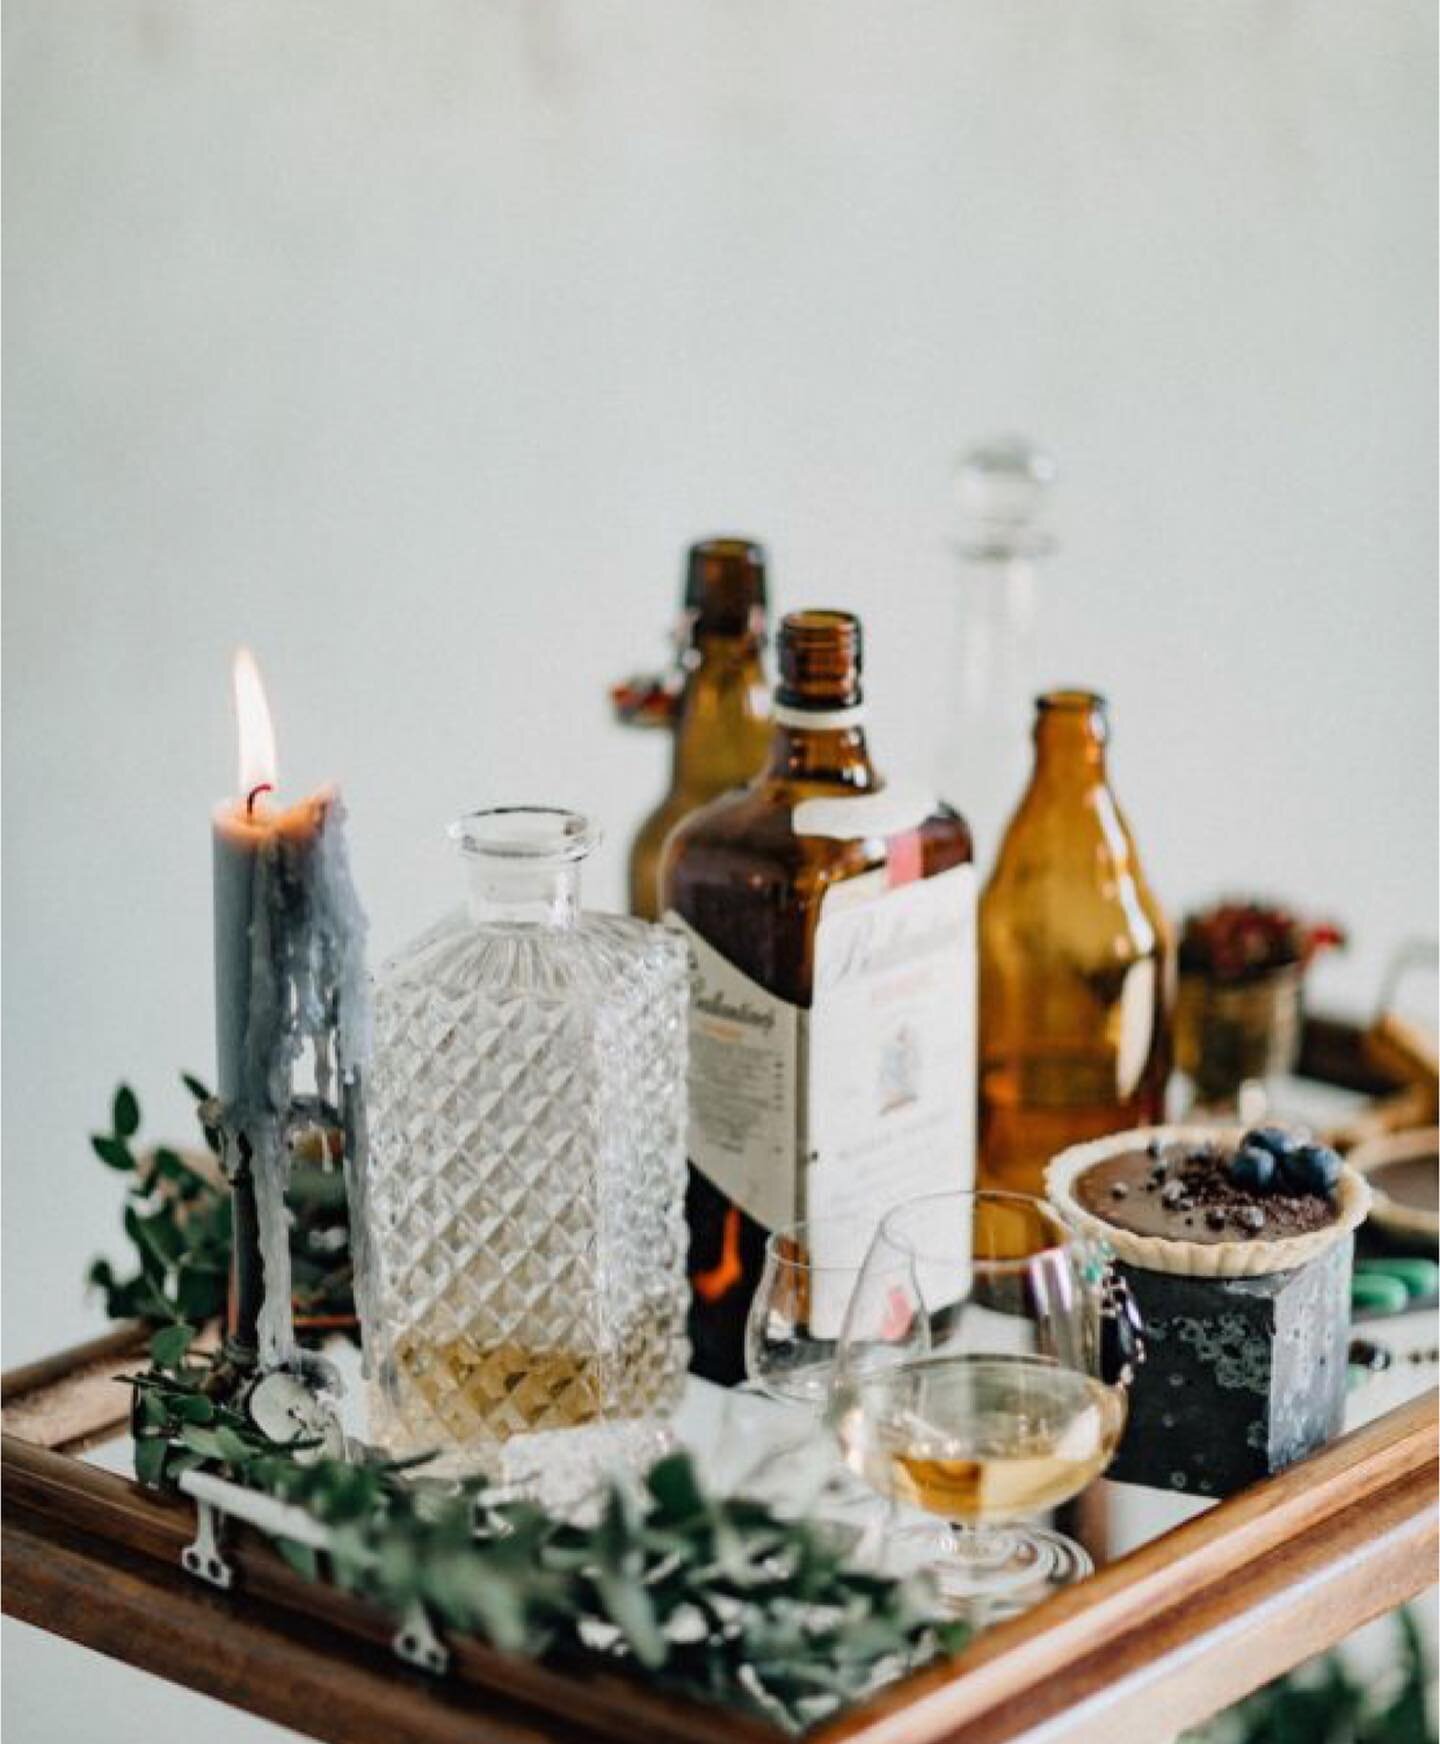 Why You Should Have a Drink Cart at Your Next Event 🍻 

From fruit punch to water, beer or champagne - you simply can&rsquo;t go wrong with a drink cart for any occasion. Not only are they versatile, they&rsquo;re quaint and easily accessible for al